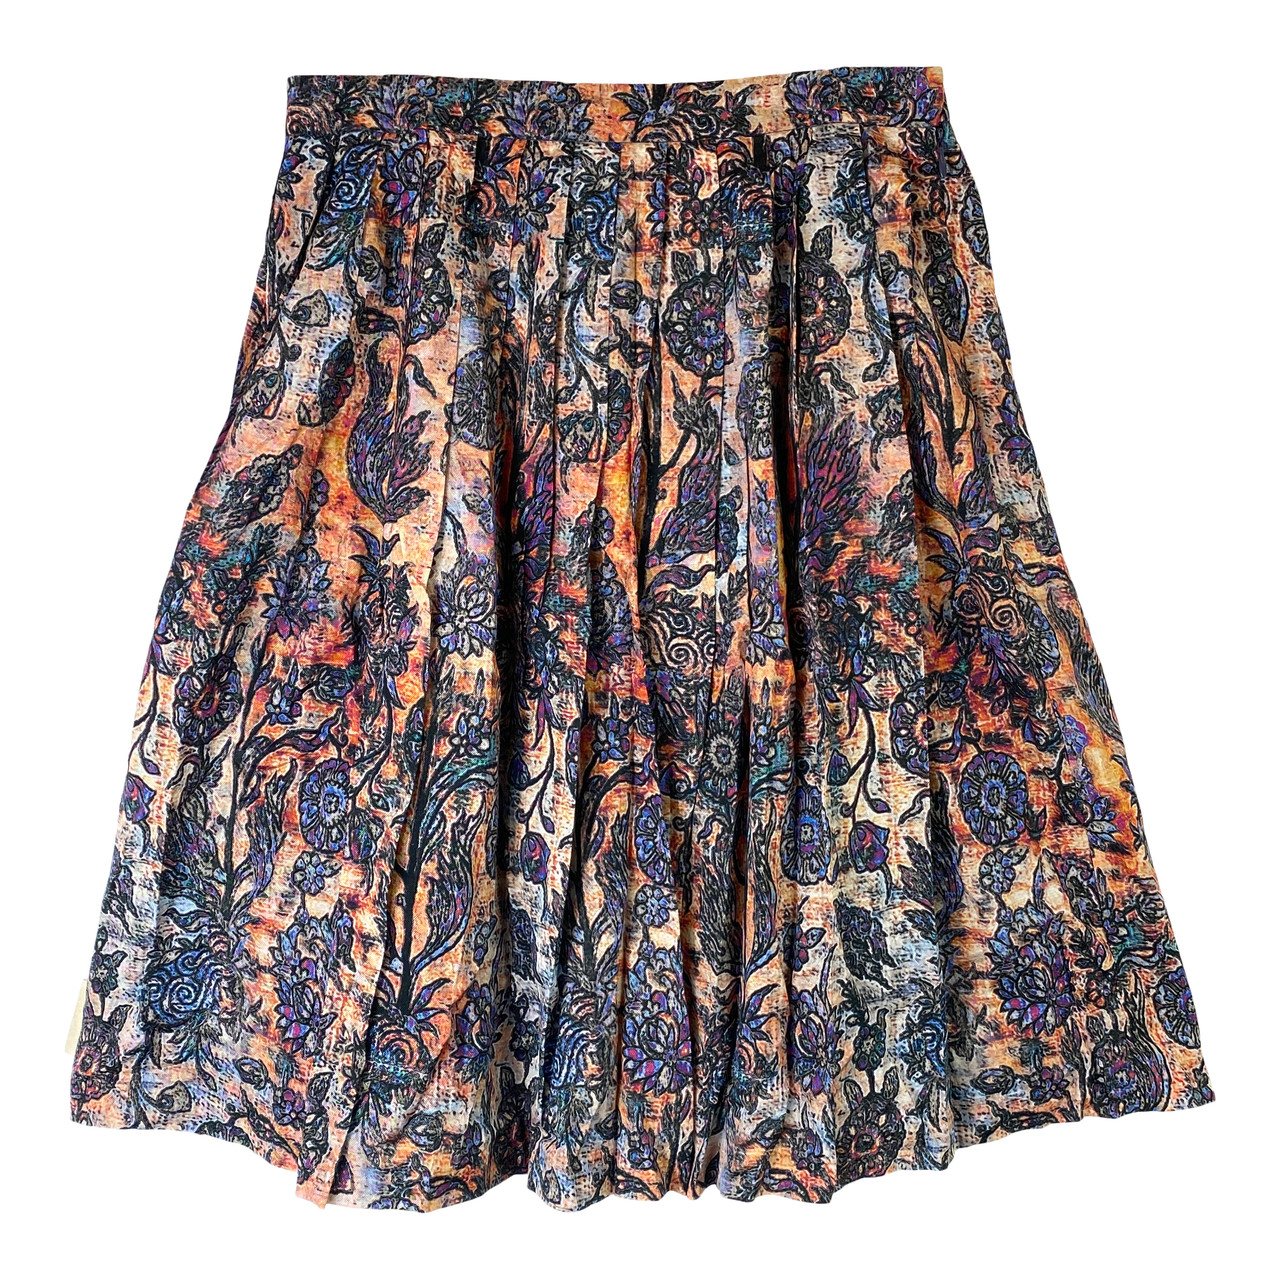 Peruvian Connection Graphic Floral Hilldale Skirt